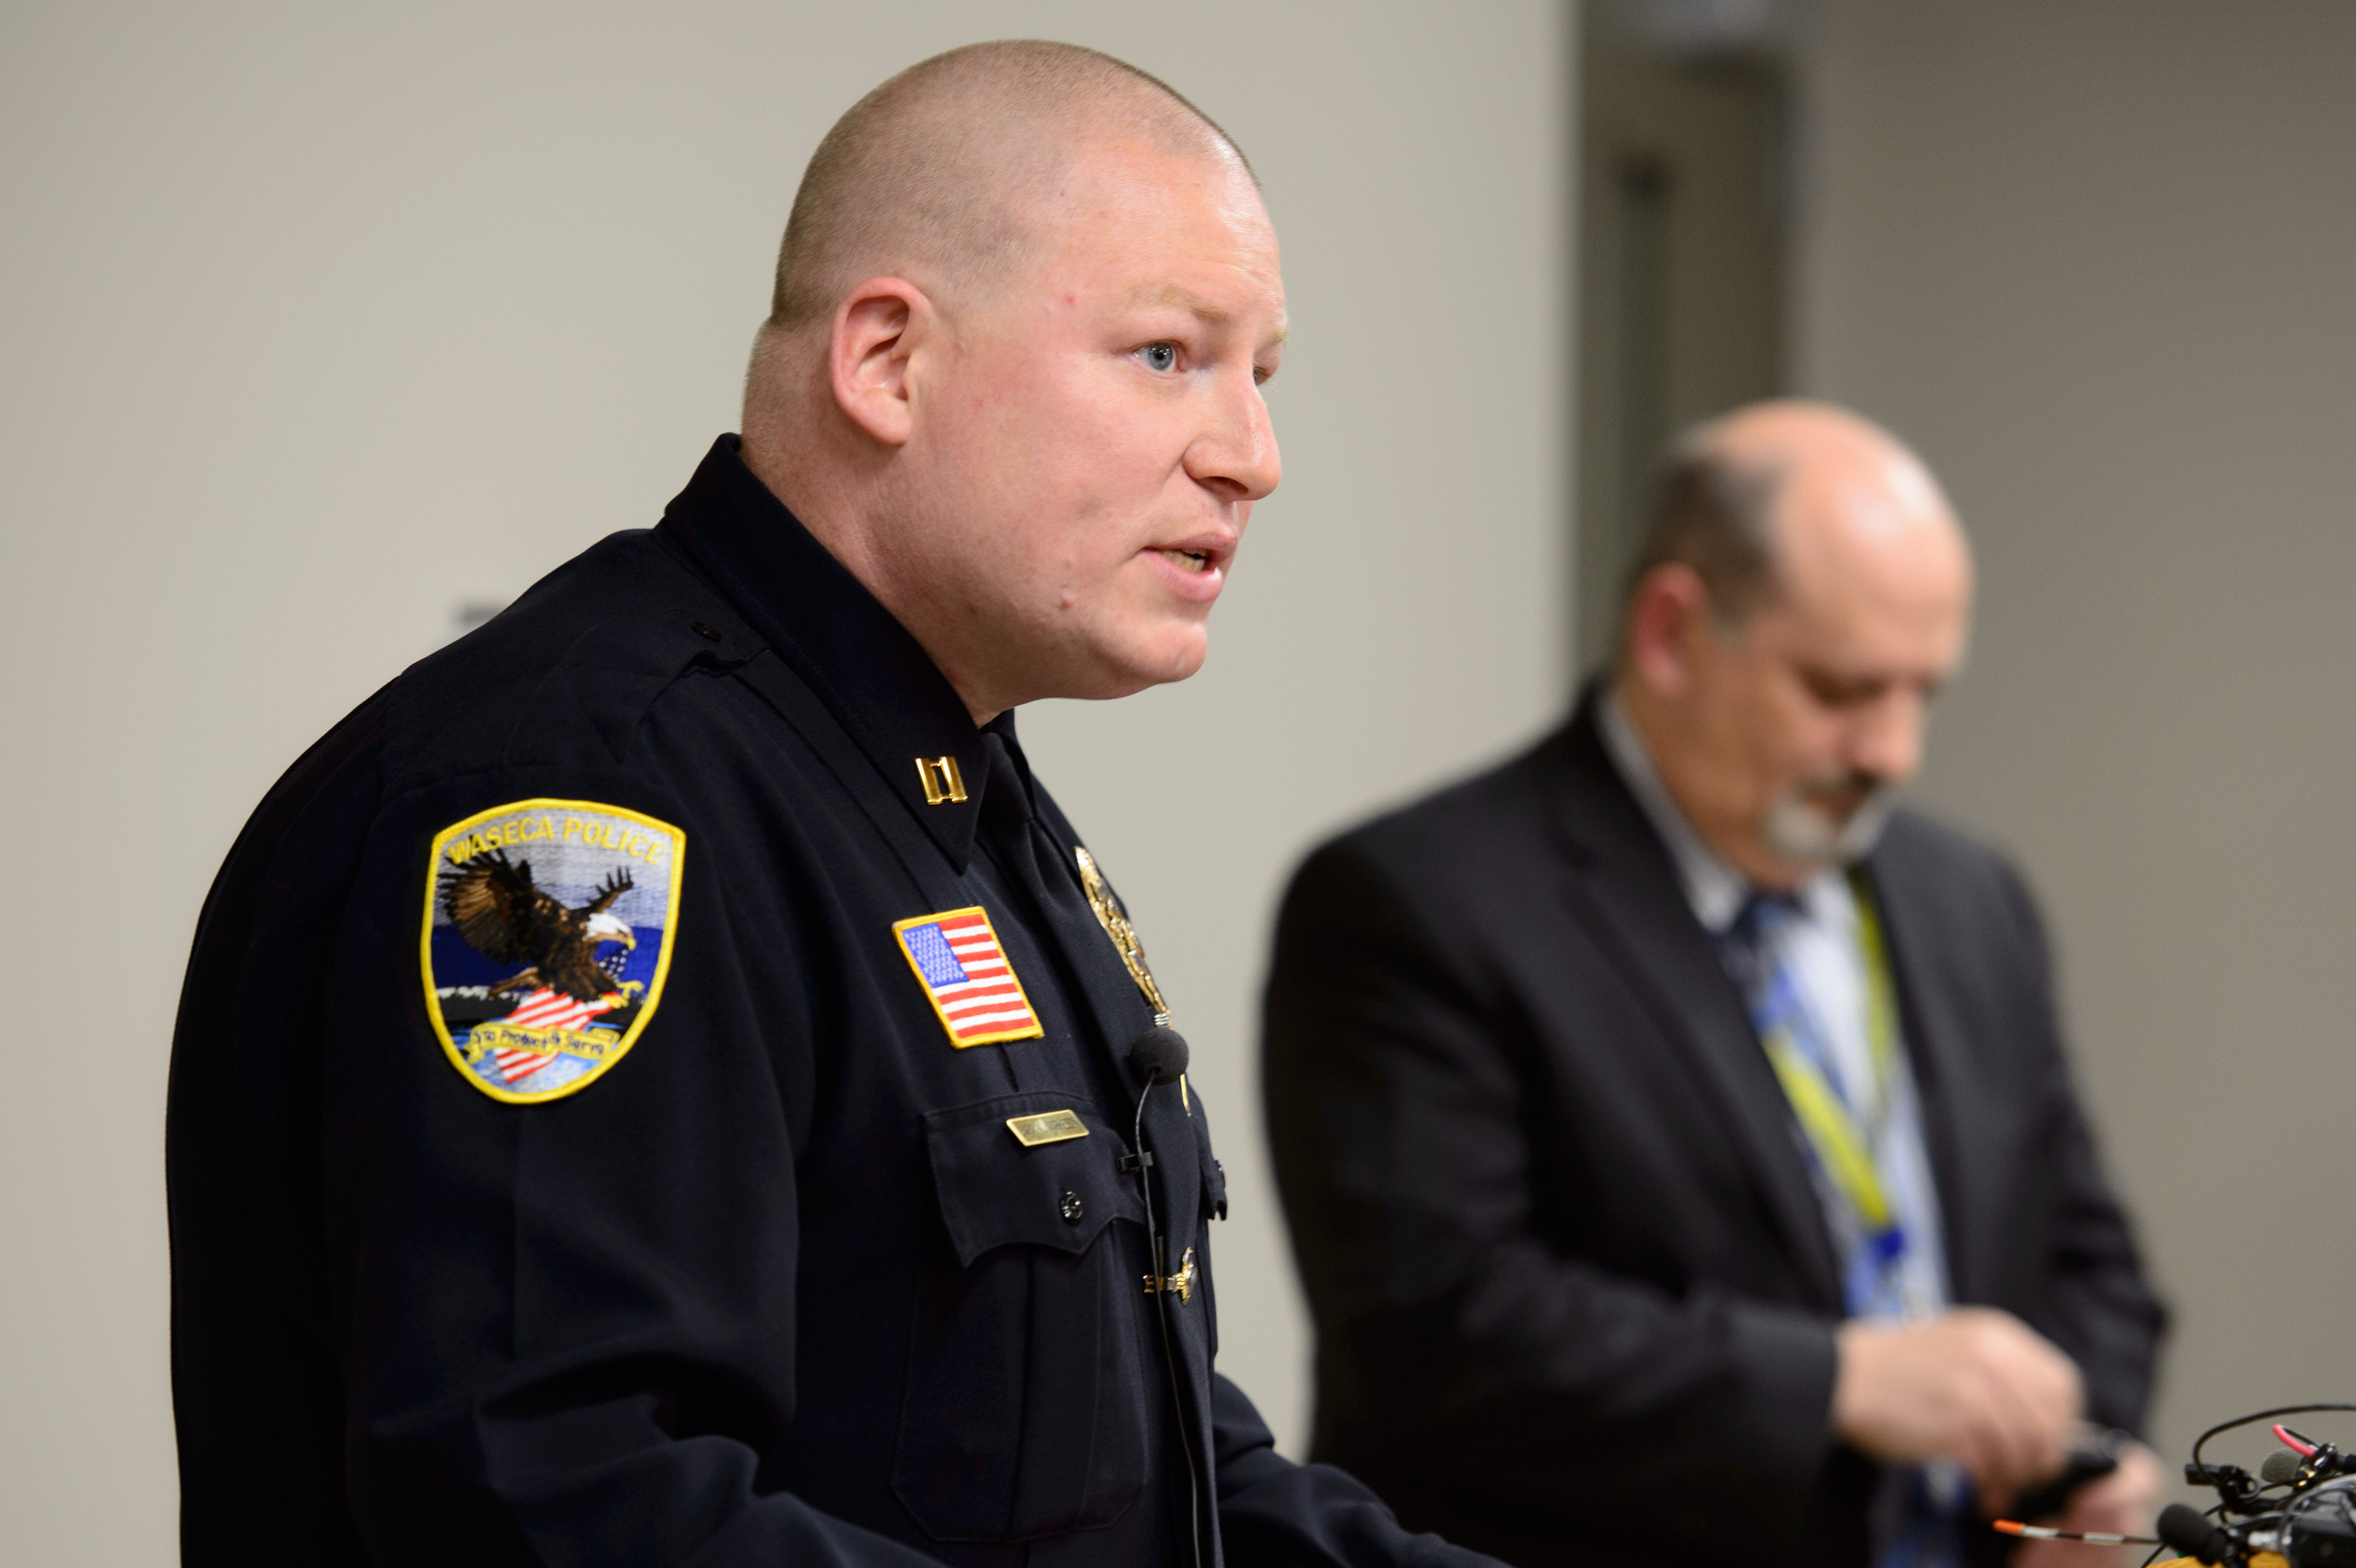 Waseca Police Captain Kris Markeson, left, and Waseca school Superintendent Tom Lee spoke at a news conference on May 1, about the  17-year-old arrested in plot to kill family and massacre students at Waseca school.